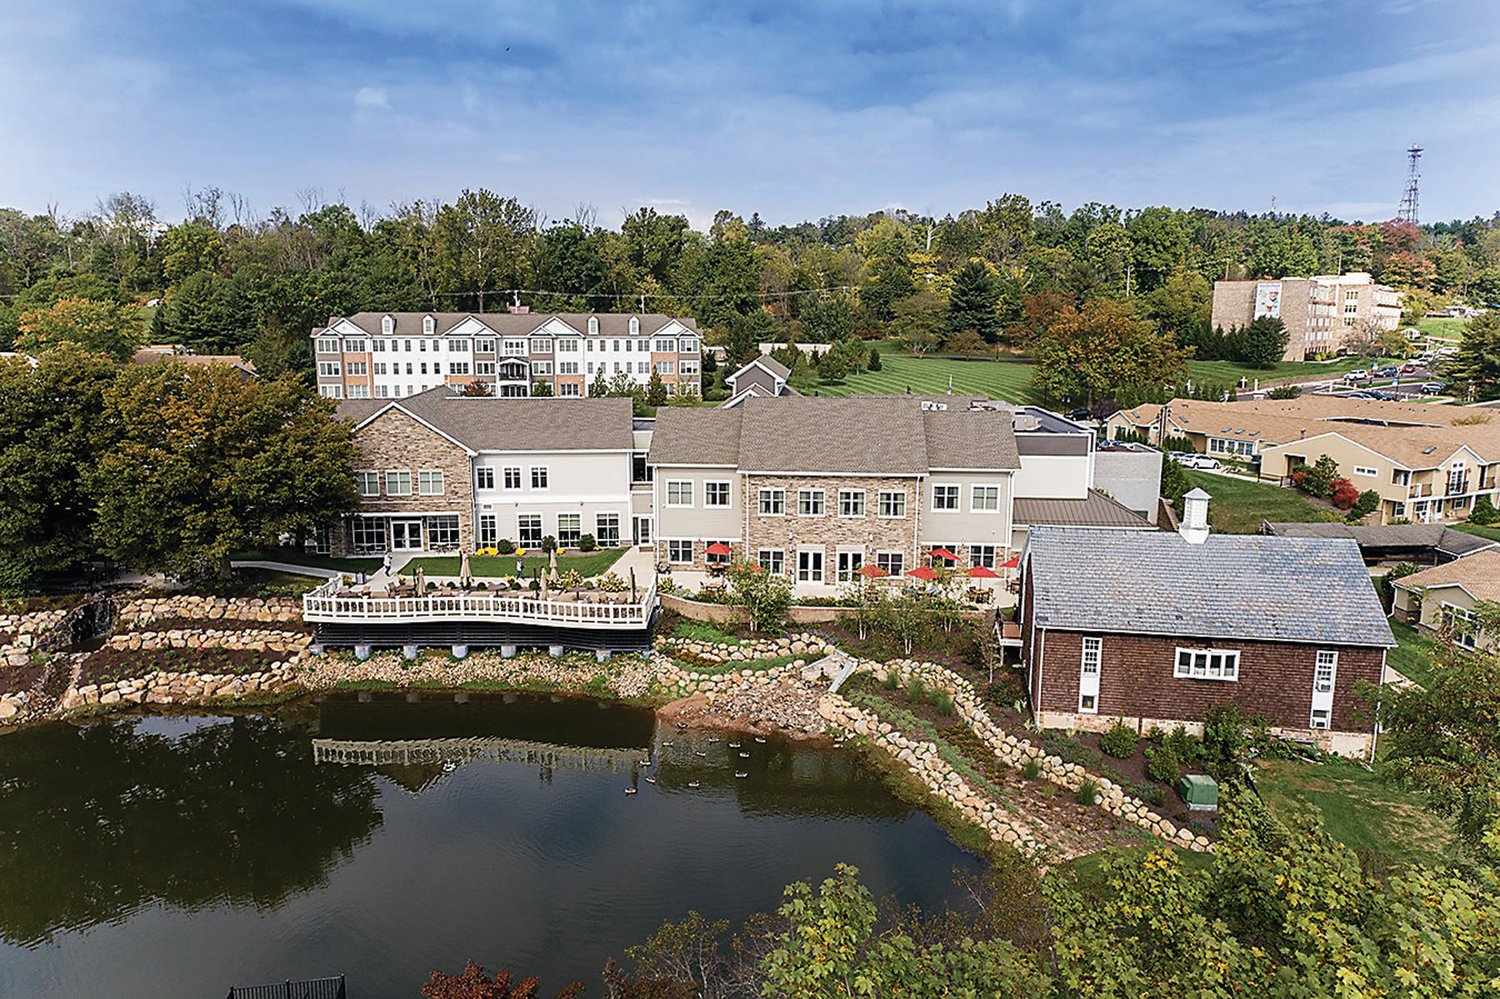 Presbyterian Senior Living (PSL) and Doylestown Hospital said they have entered into a non-binding Letter of Intent in consideration of the acquisition of Pine Run Retirement Community.